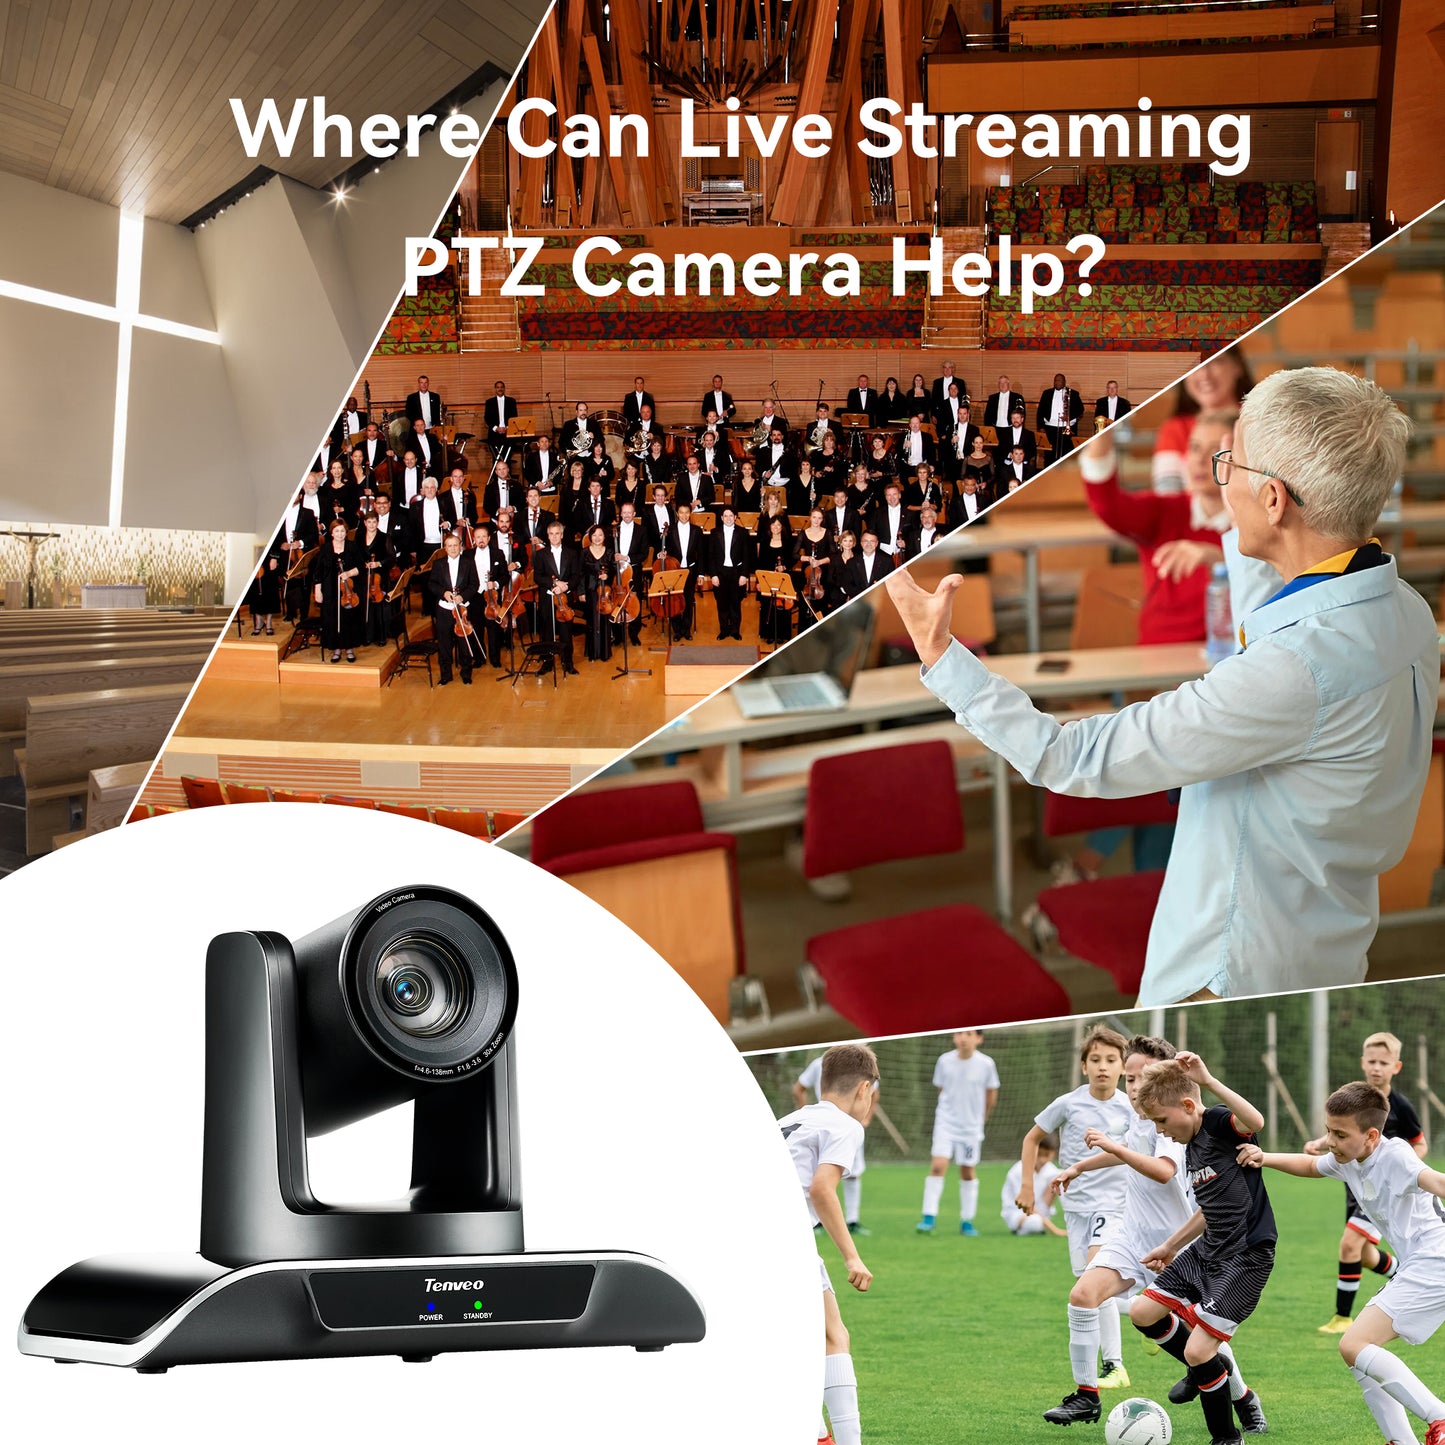 Tenveo VHDMAX NDI 1080P FHD PTZ Conference Camera with Smart Auto Tracking, 30X Optical Zoom, 2MP 1/2.8" Sony Sensor, 3G-SDI, HDMI, USB, and LAN Output for Video Live Streaming, Broadcast, Meeting & Conferencing